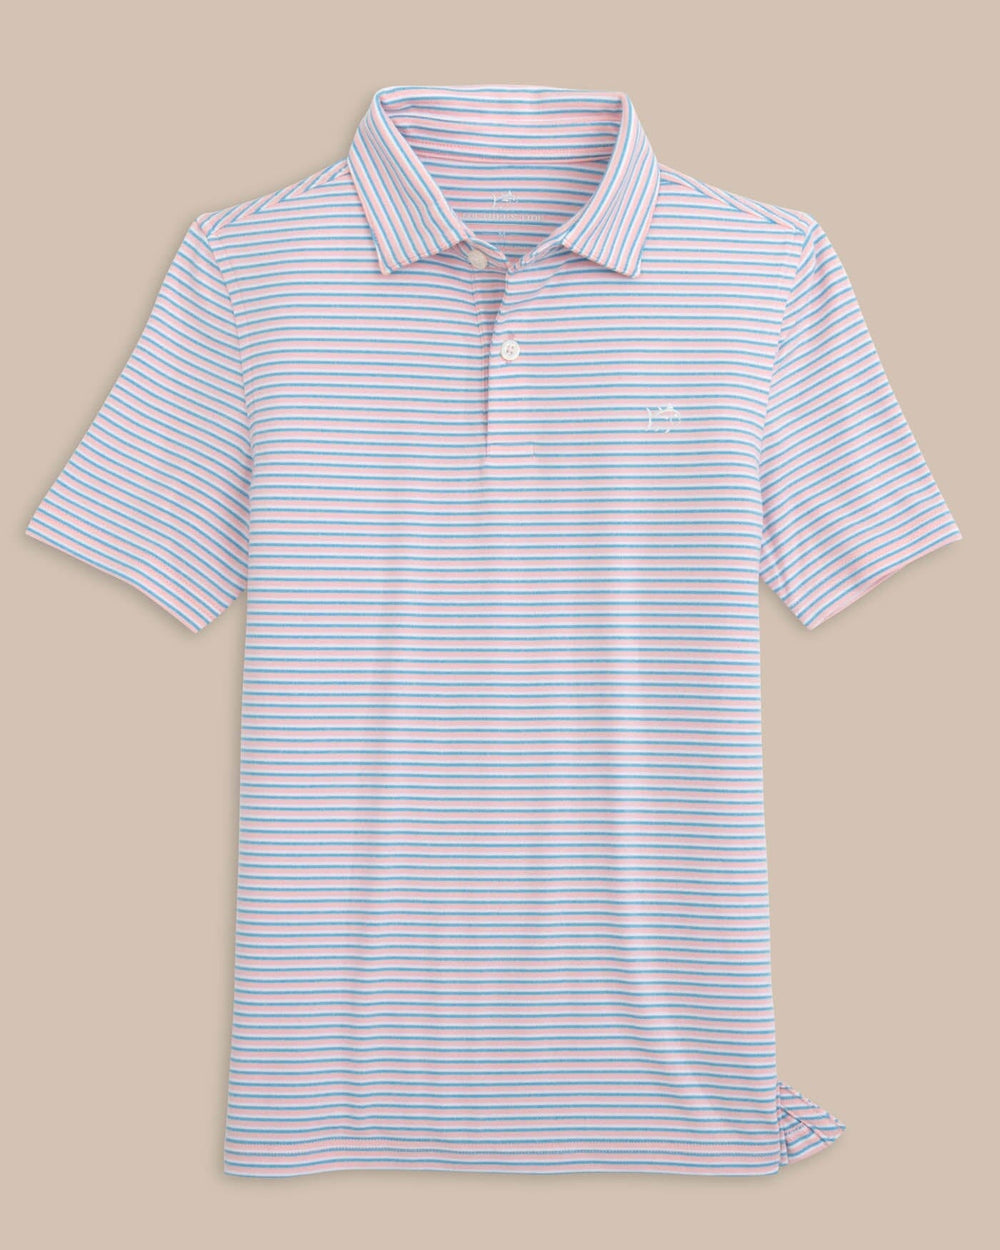 The front view of the Southern Tide Kids Ryder Heather Halls Stripe Performance Polo by Southern Tide - Heather Pale Rosette Pink